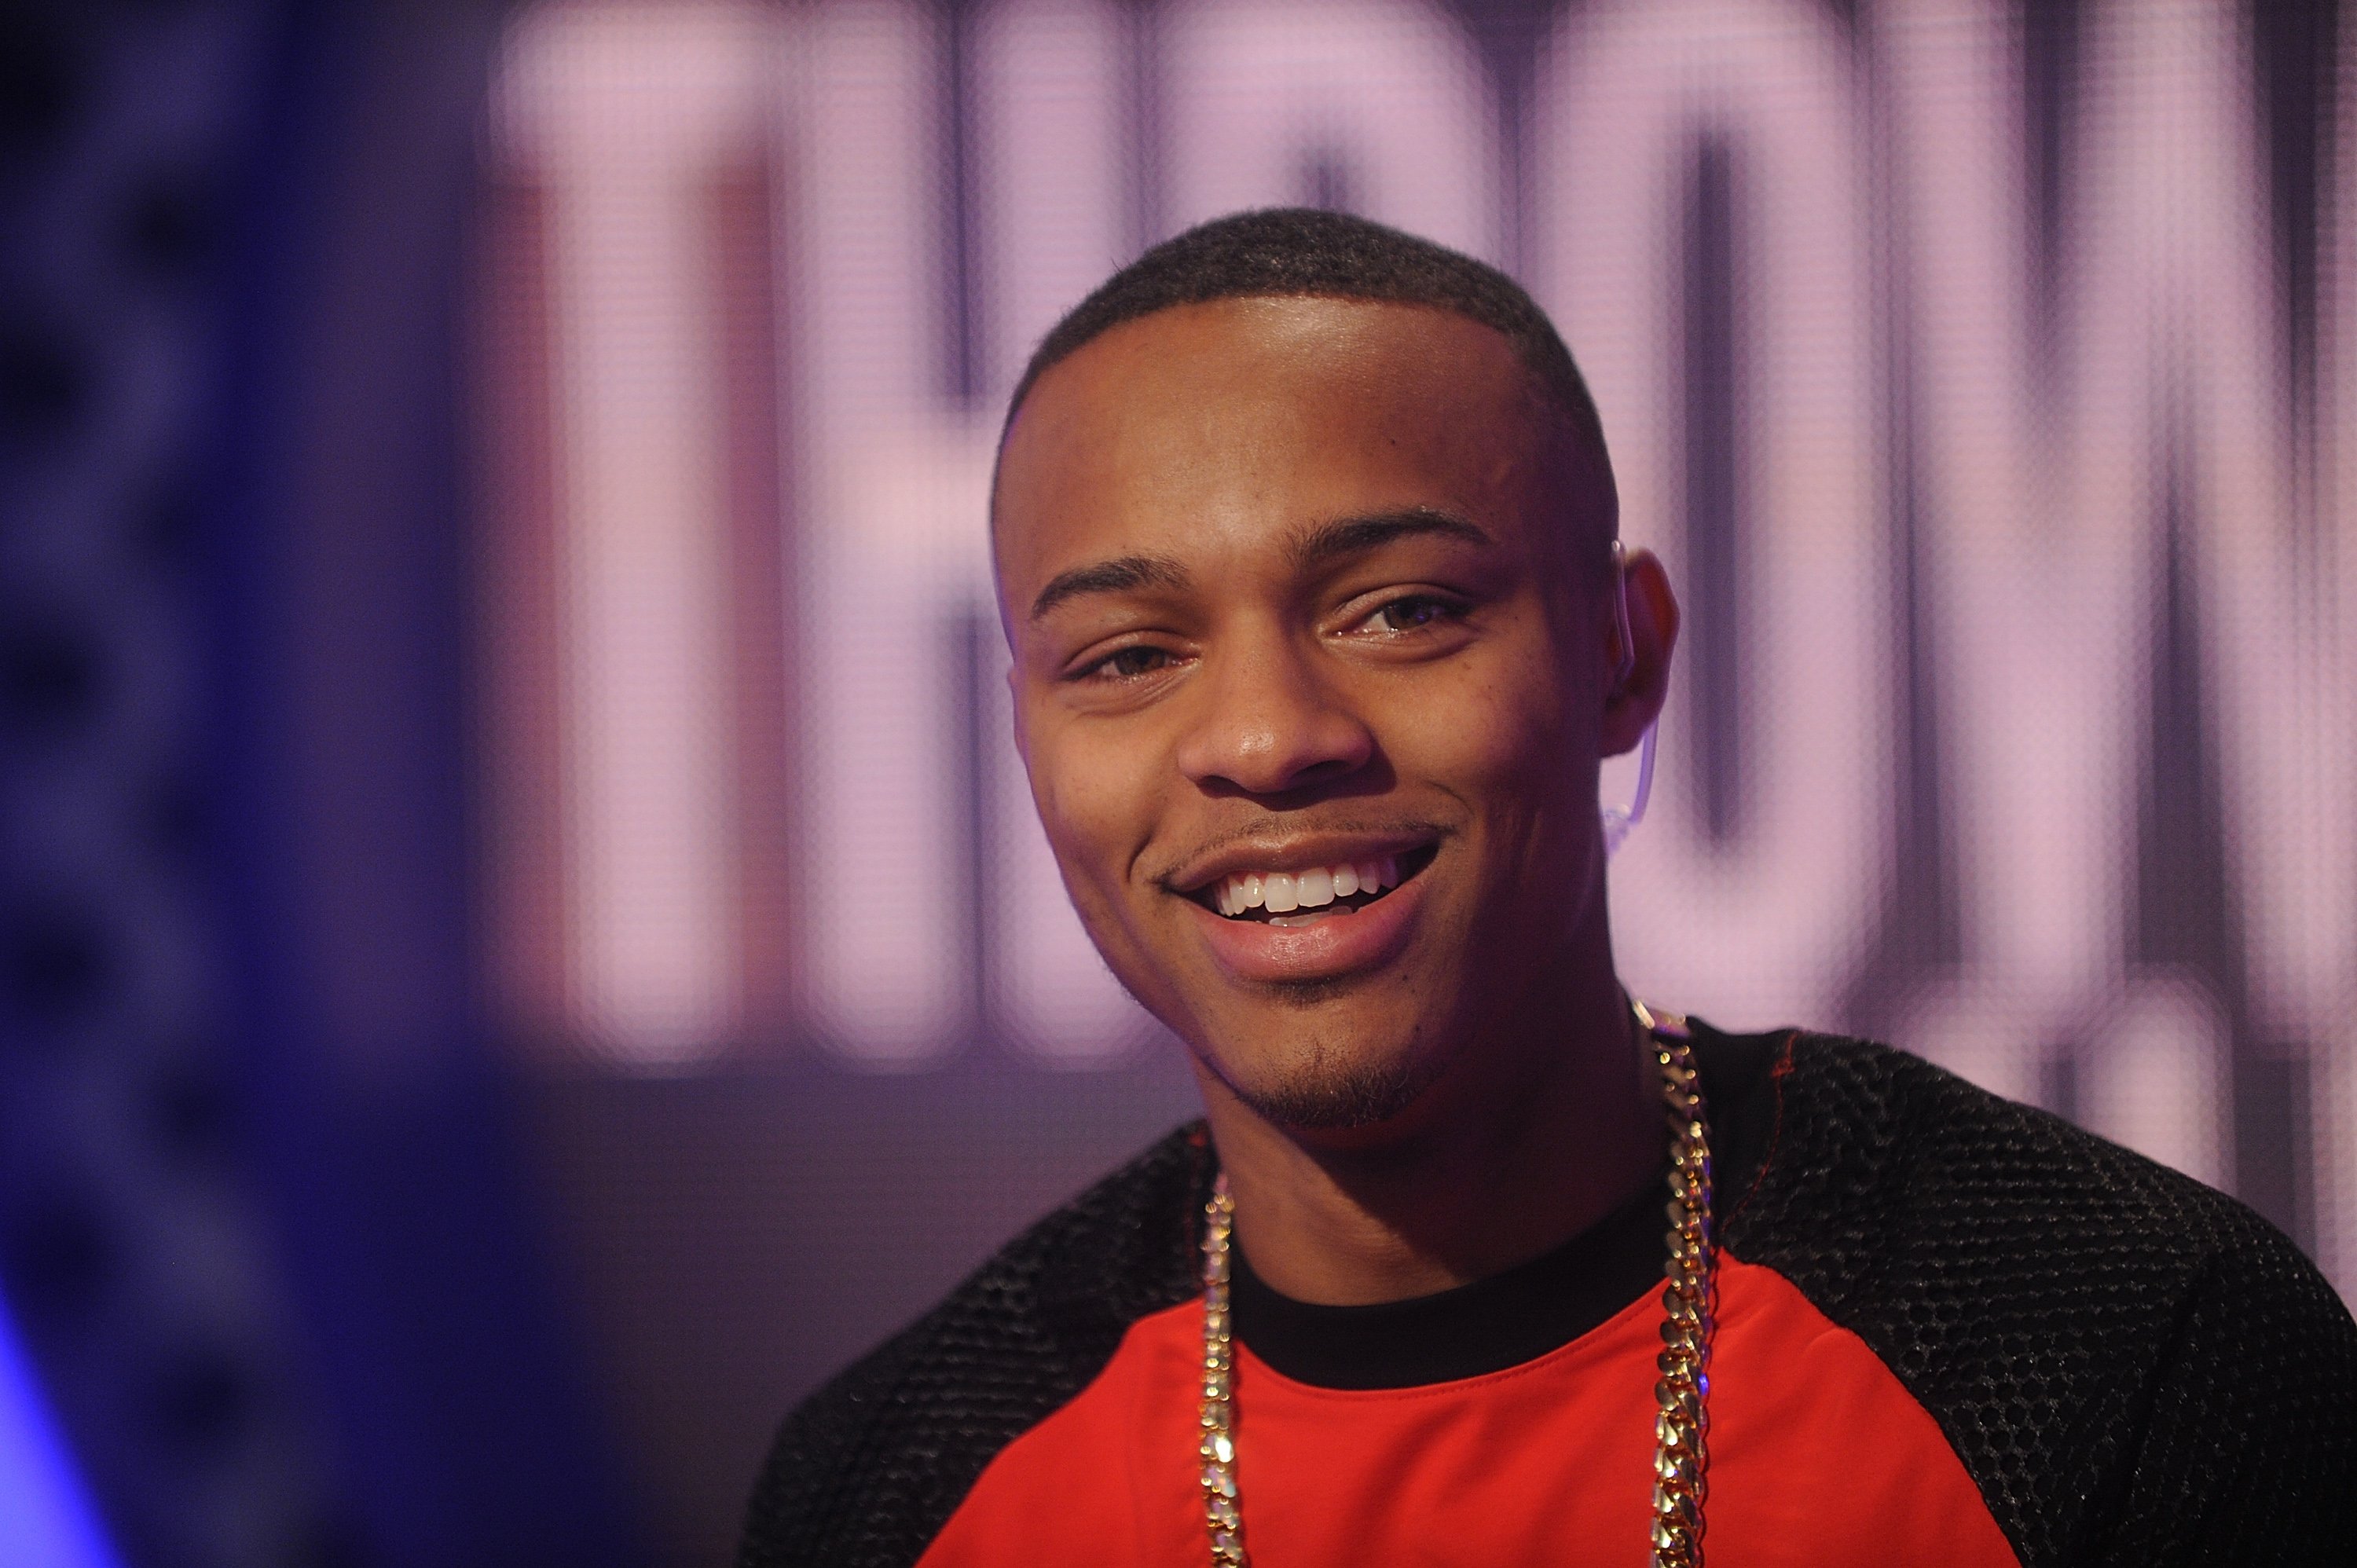 Bow Wow at the BET 106 and Park in New York City, 2014 | Source: Getty Images